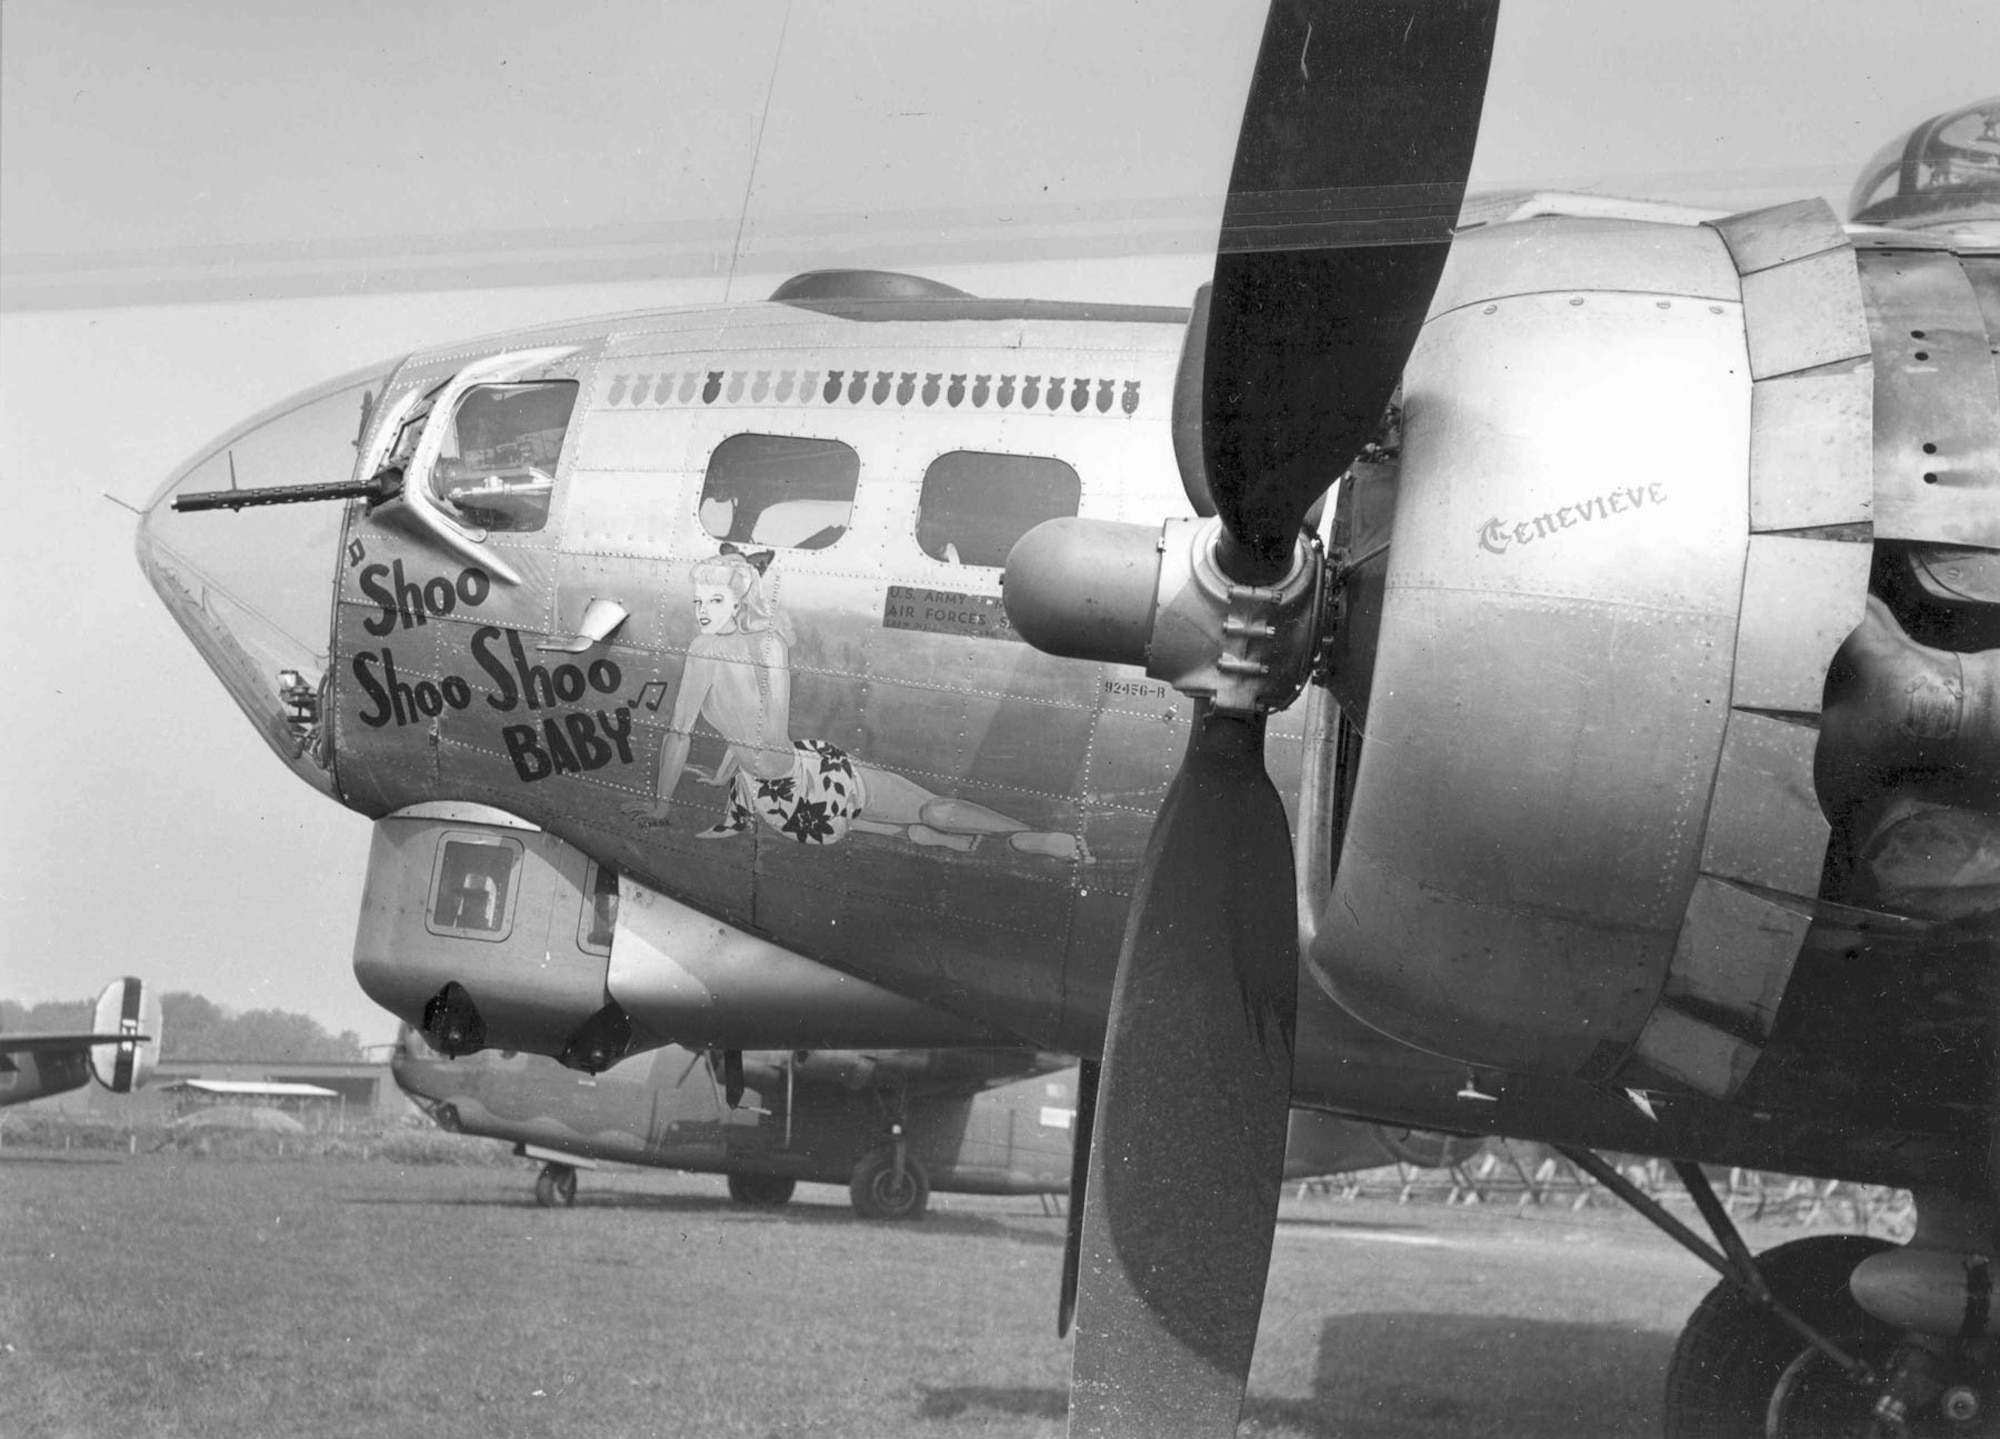 Boeing B-17G "Shoo Shoo Shoo Baby" original nose art. The aircraft was never painted when assigned to the 91st Bomb Group; however, it is displayed at the museum painted to conceal the extensive sheet metal work necessary to return the aircraft to its wartime condition. (U.S. Air Force photo)